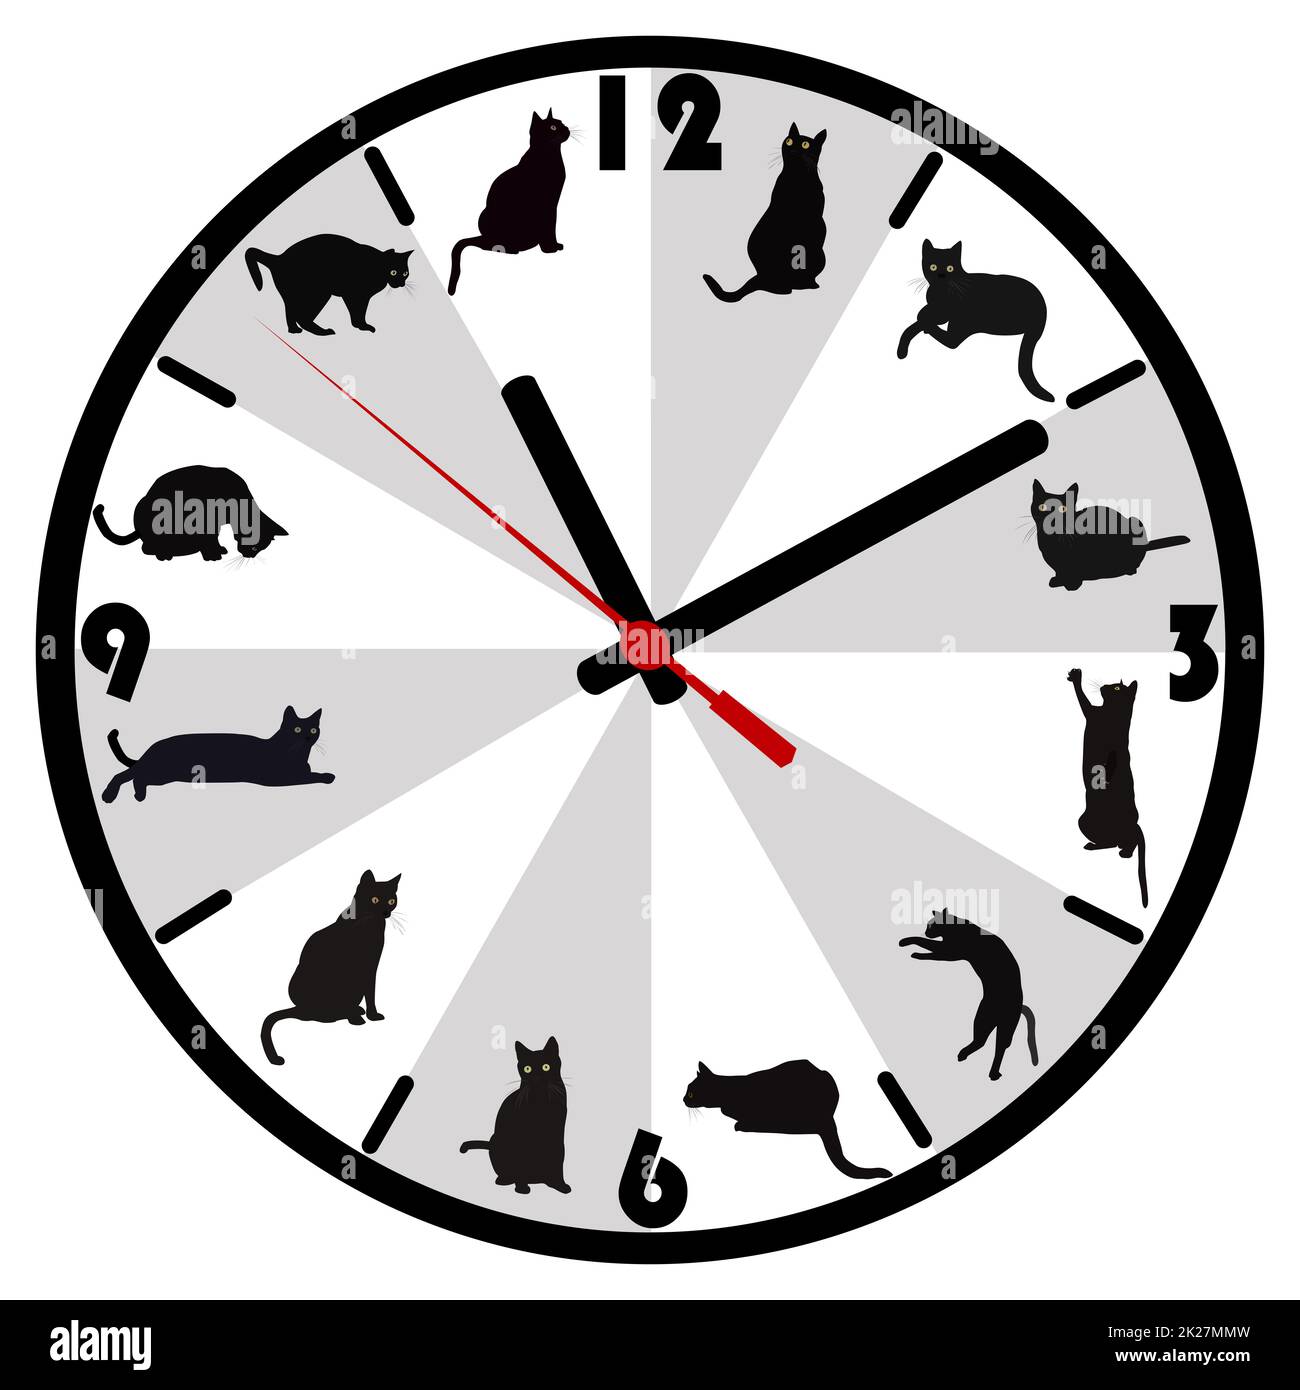 Clock face with black cats Stock Photo